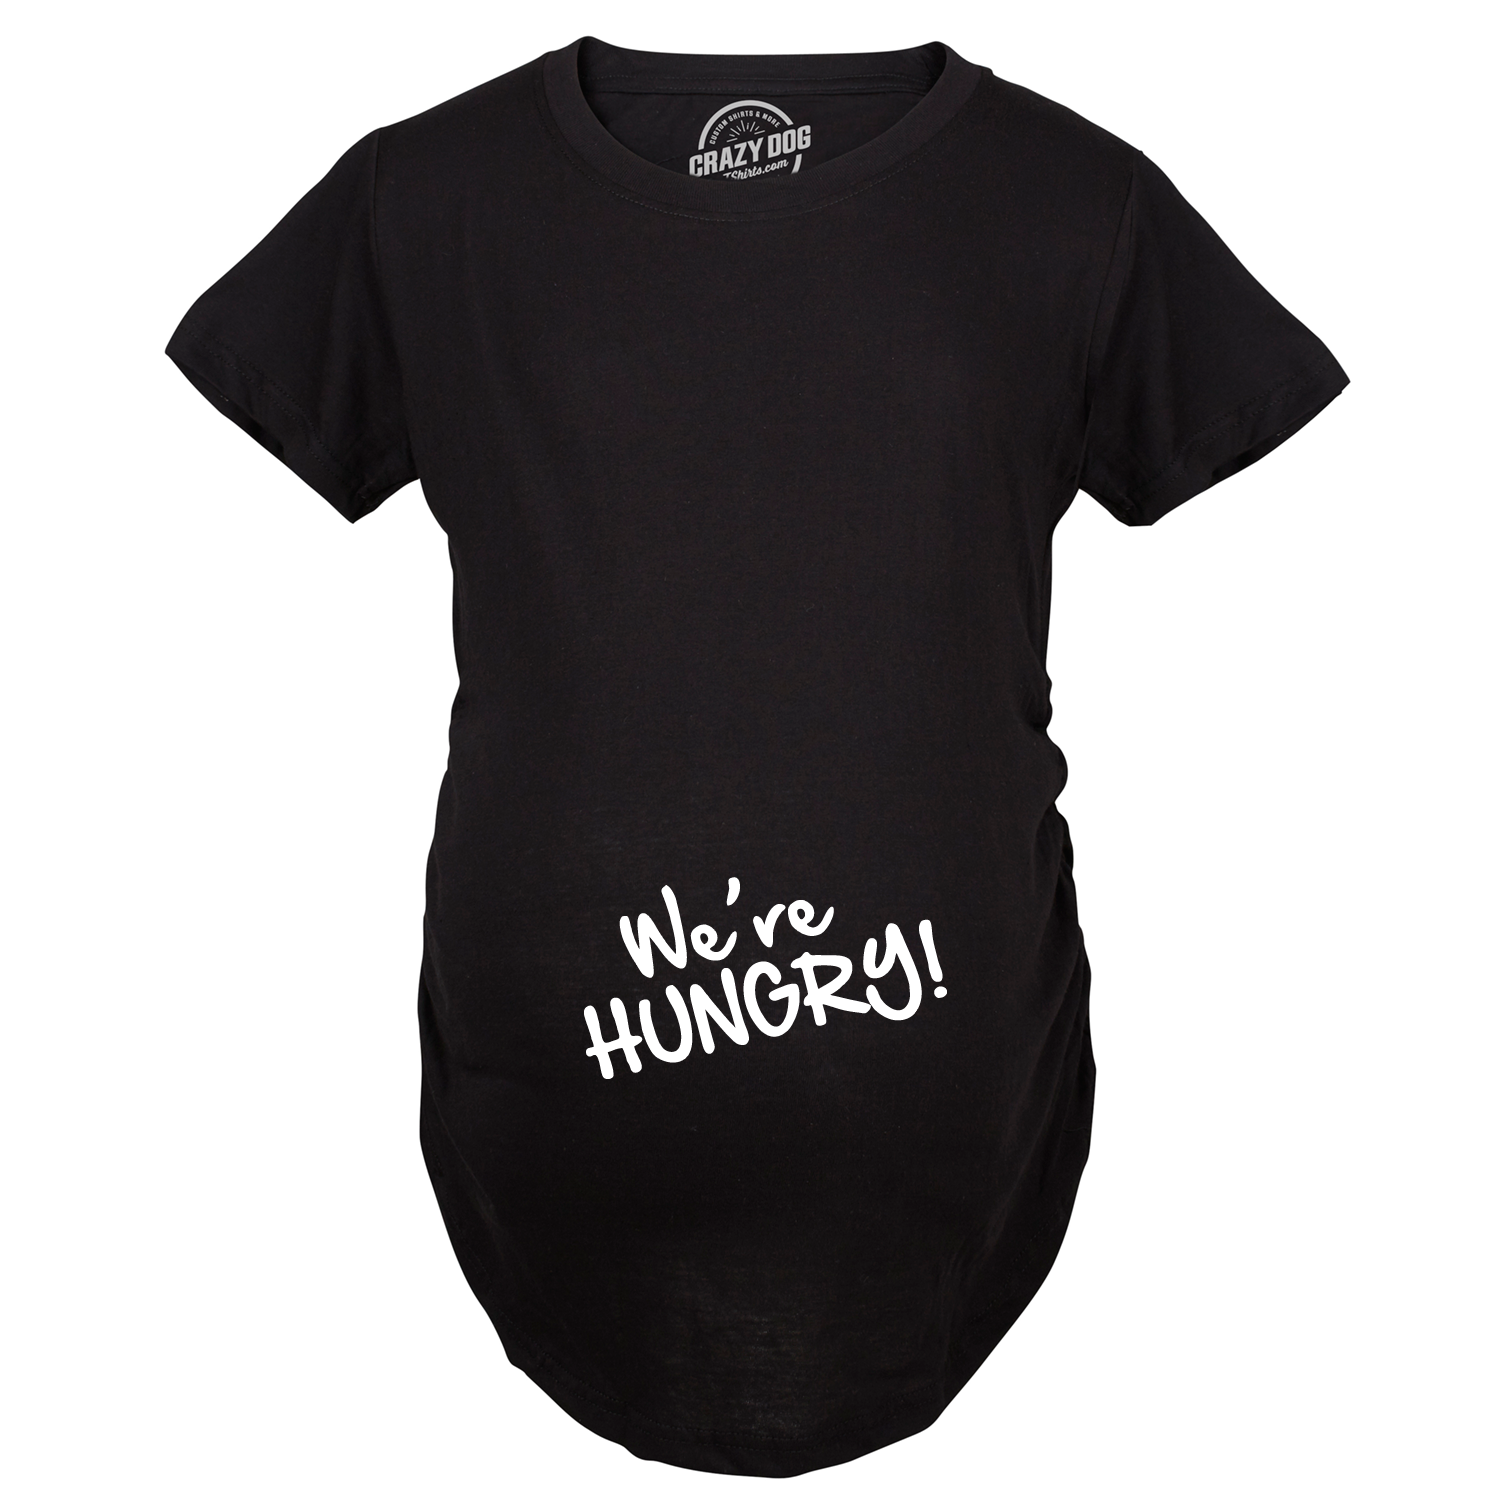 Funny We're Hungry Maternity T Shirt Nerdy Food Tee